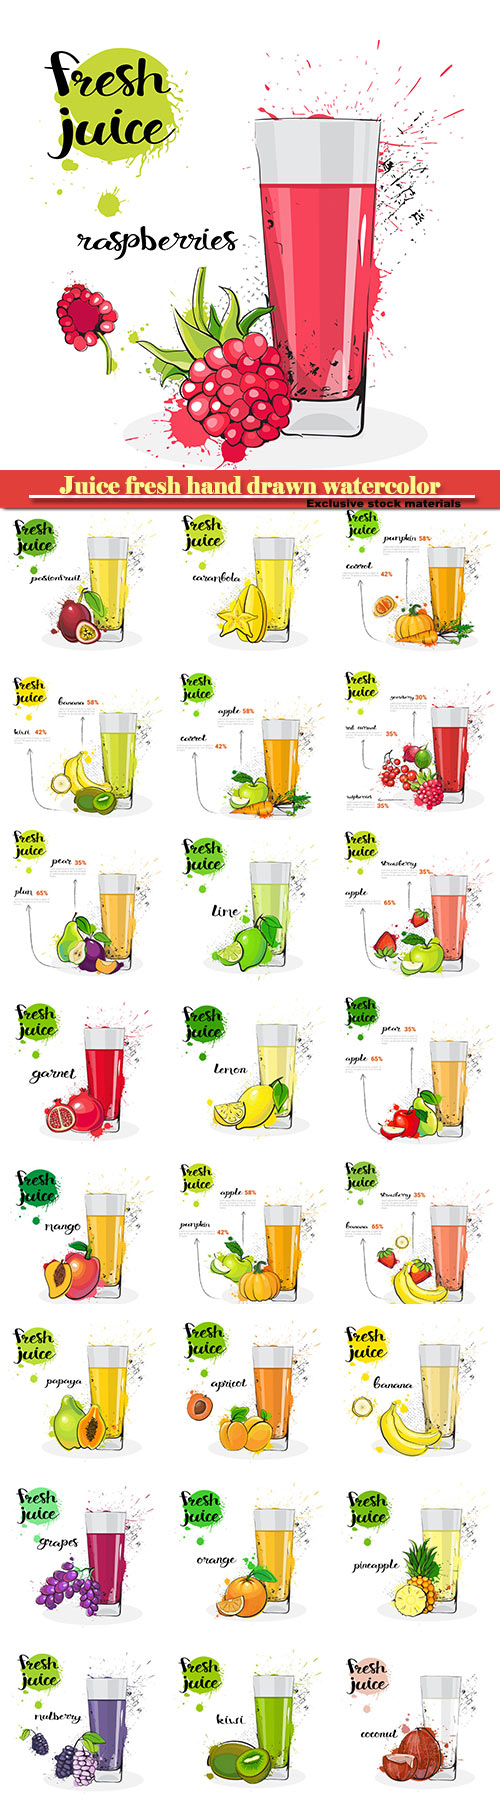 Juice fresh hand drawn watercolor, fruits and glass